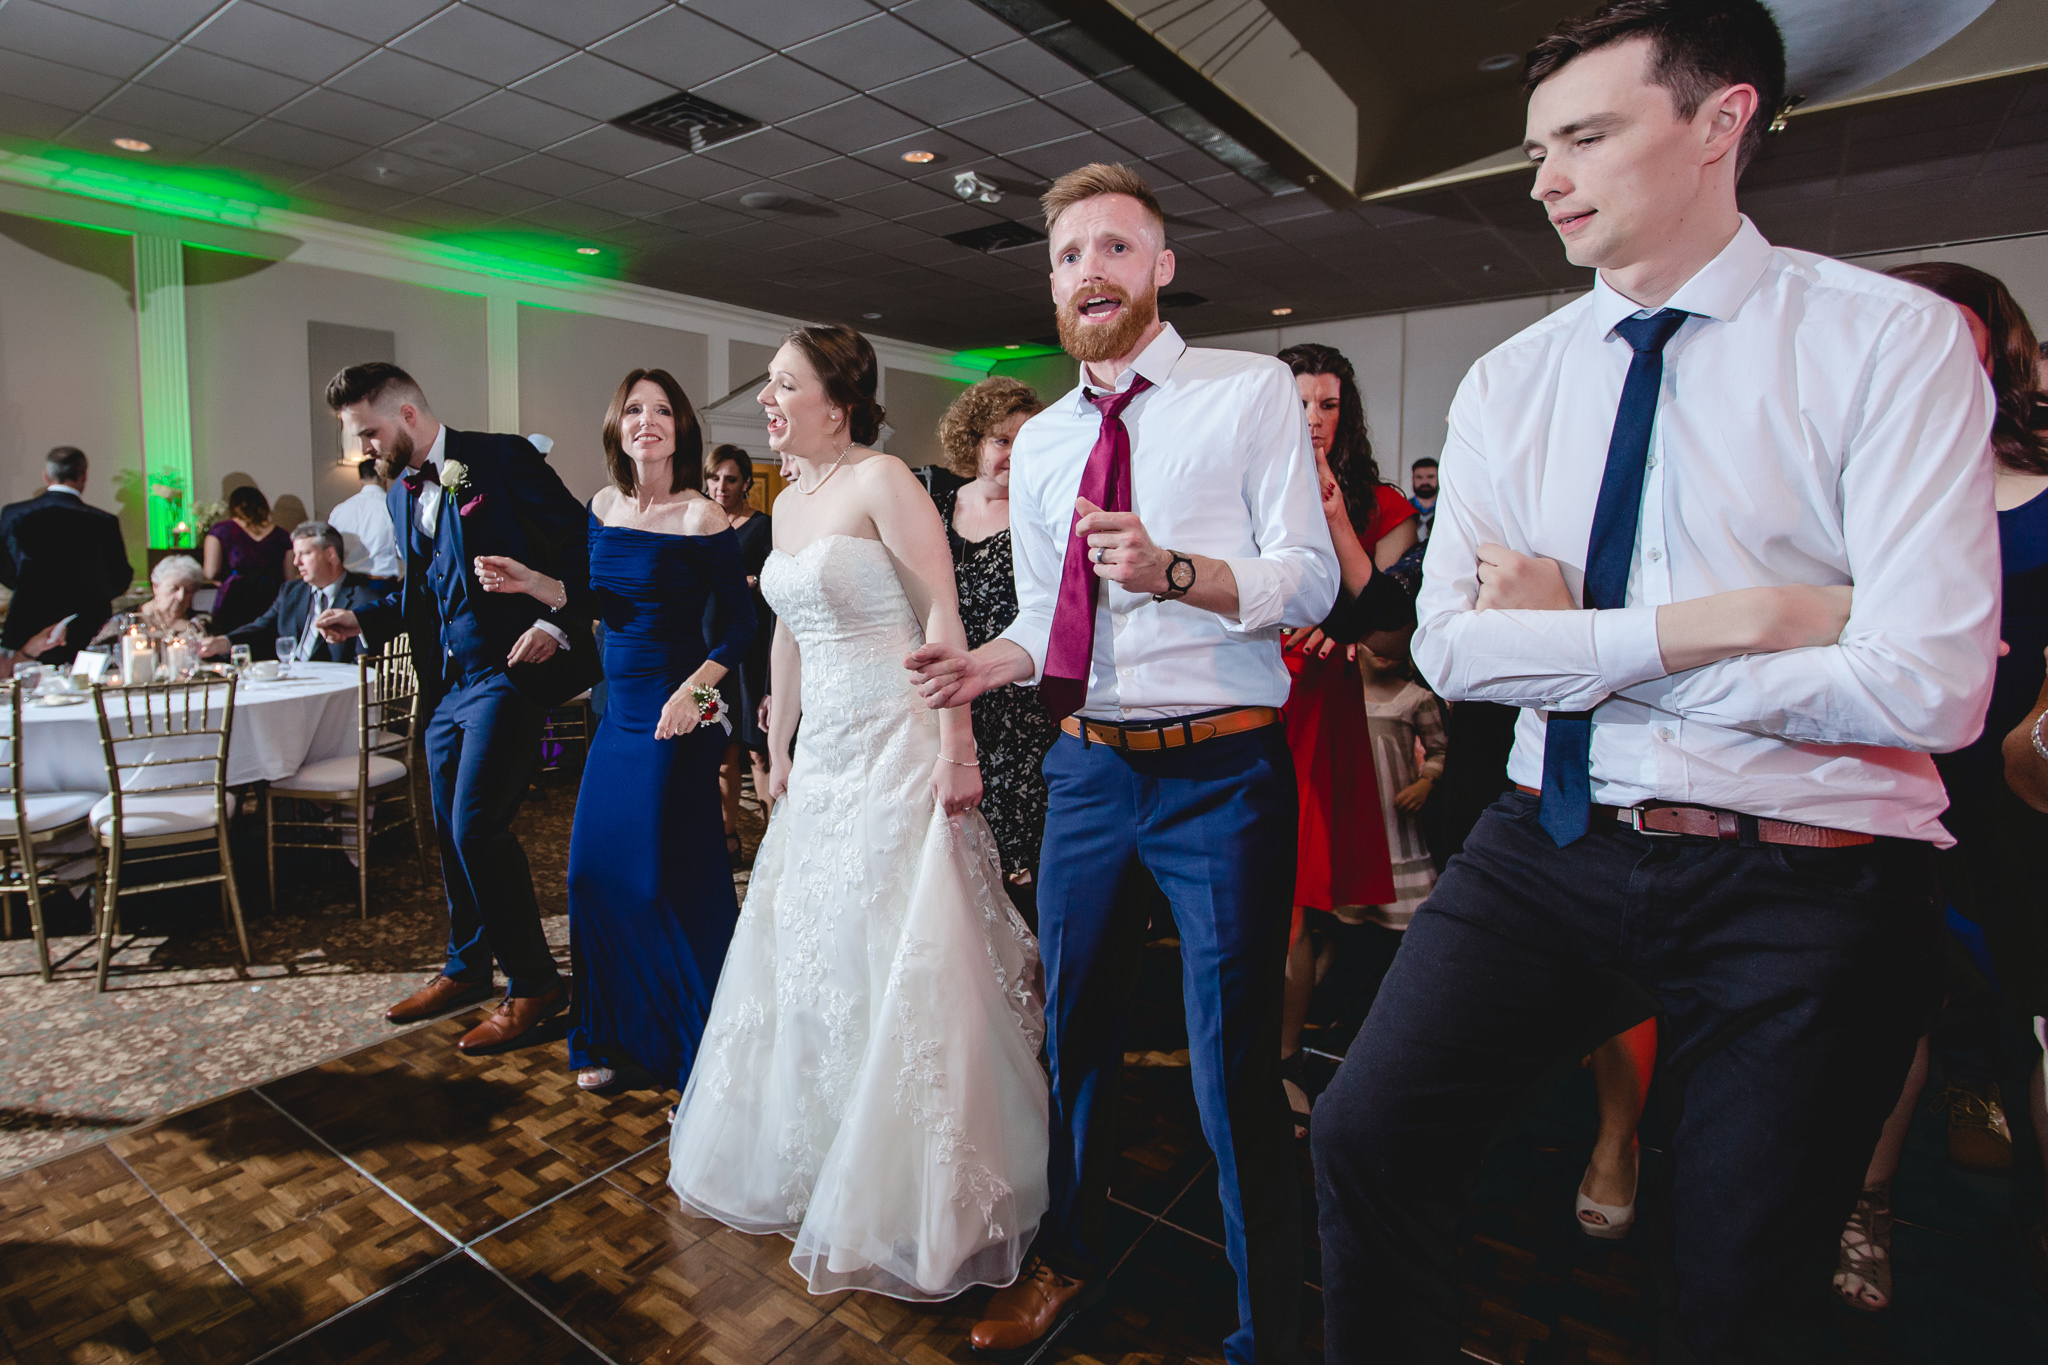 Bride and groom do the cupid shuffle at their Chadwick wedding reception